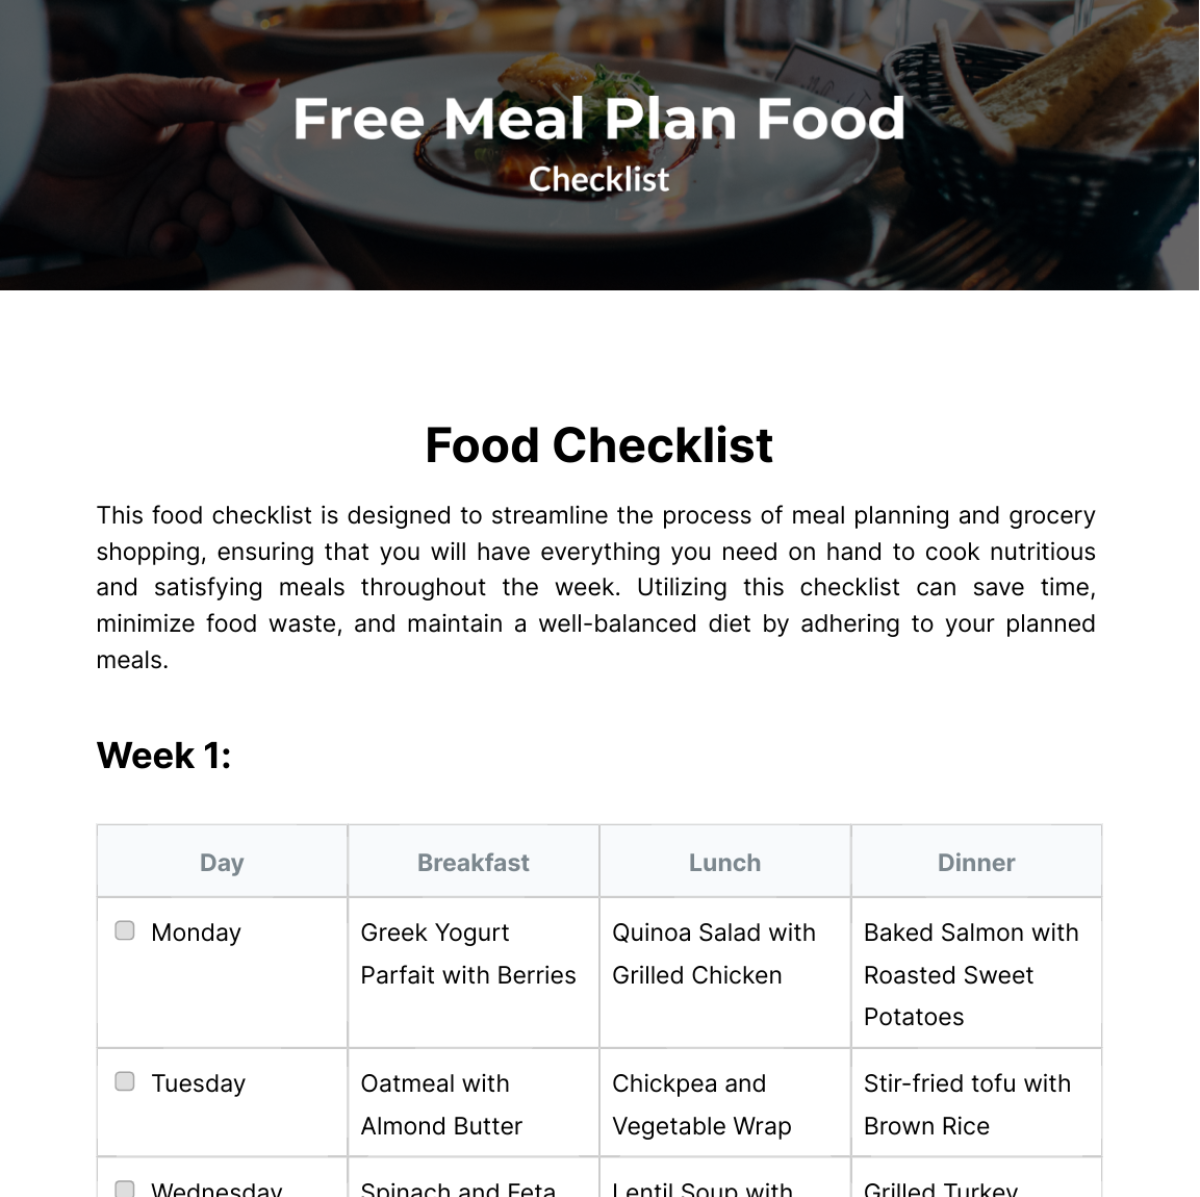 Free Meal Plan Food Checklist Template